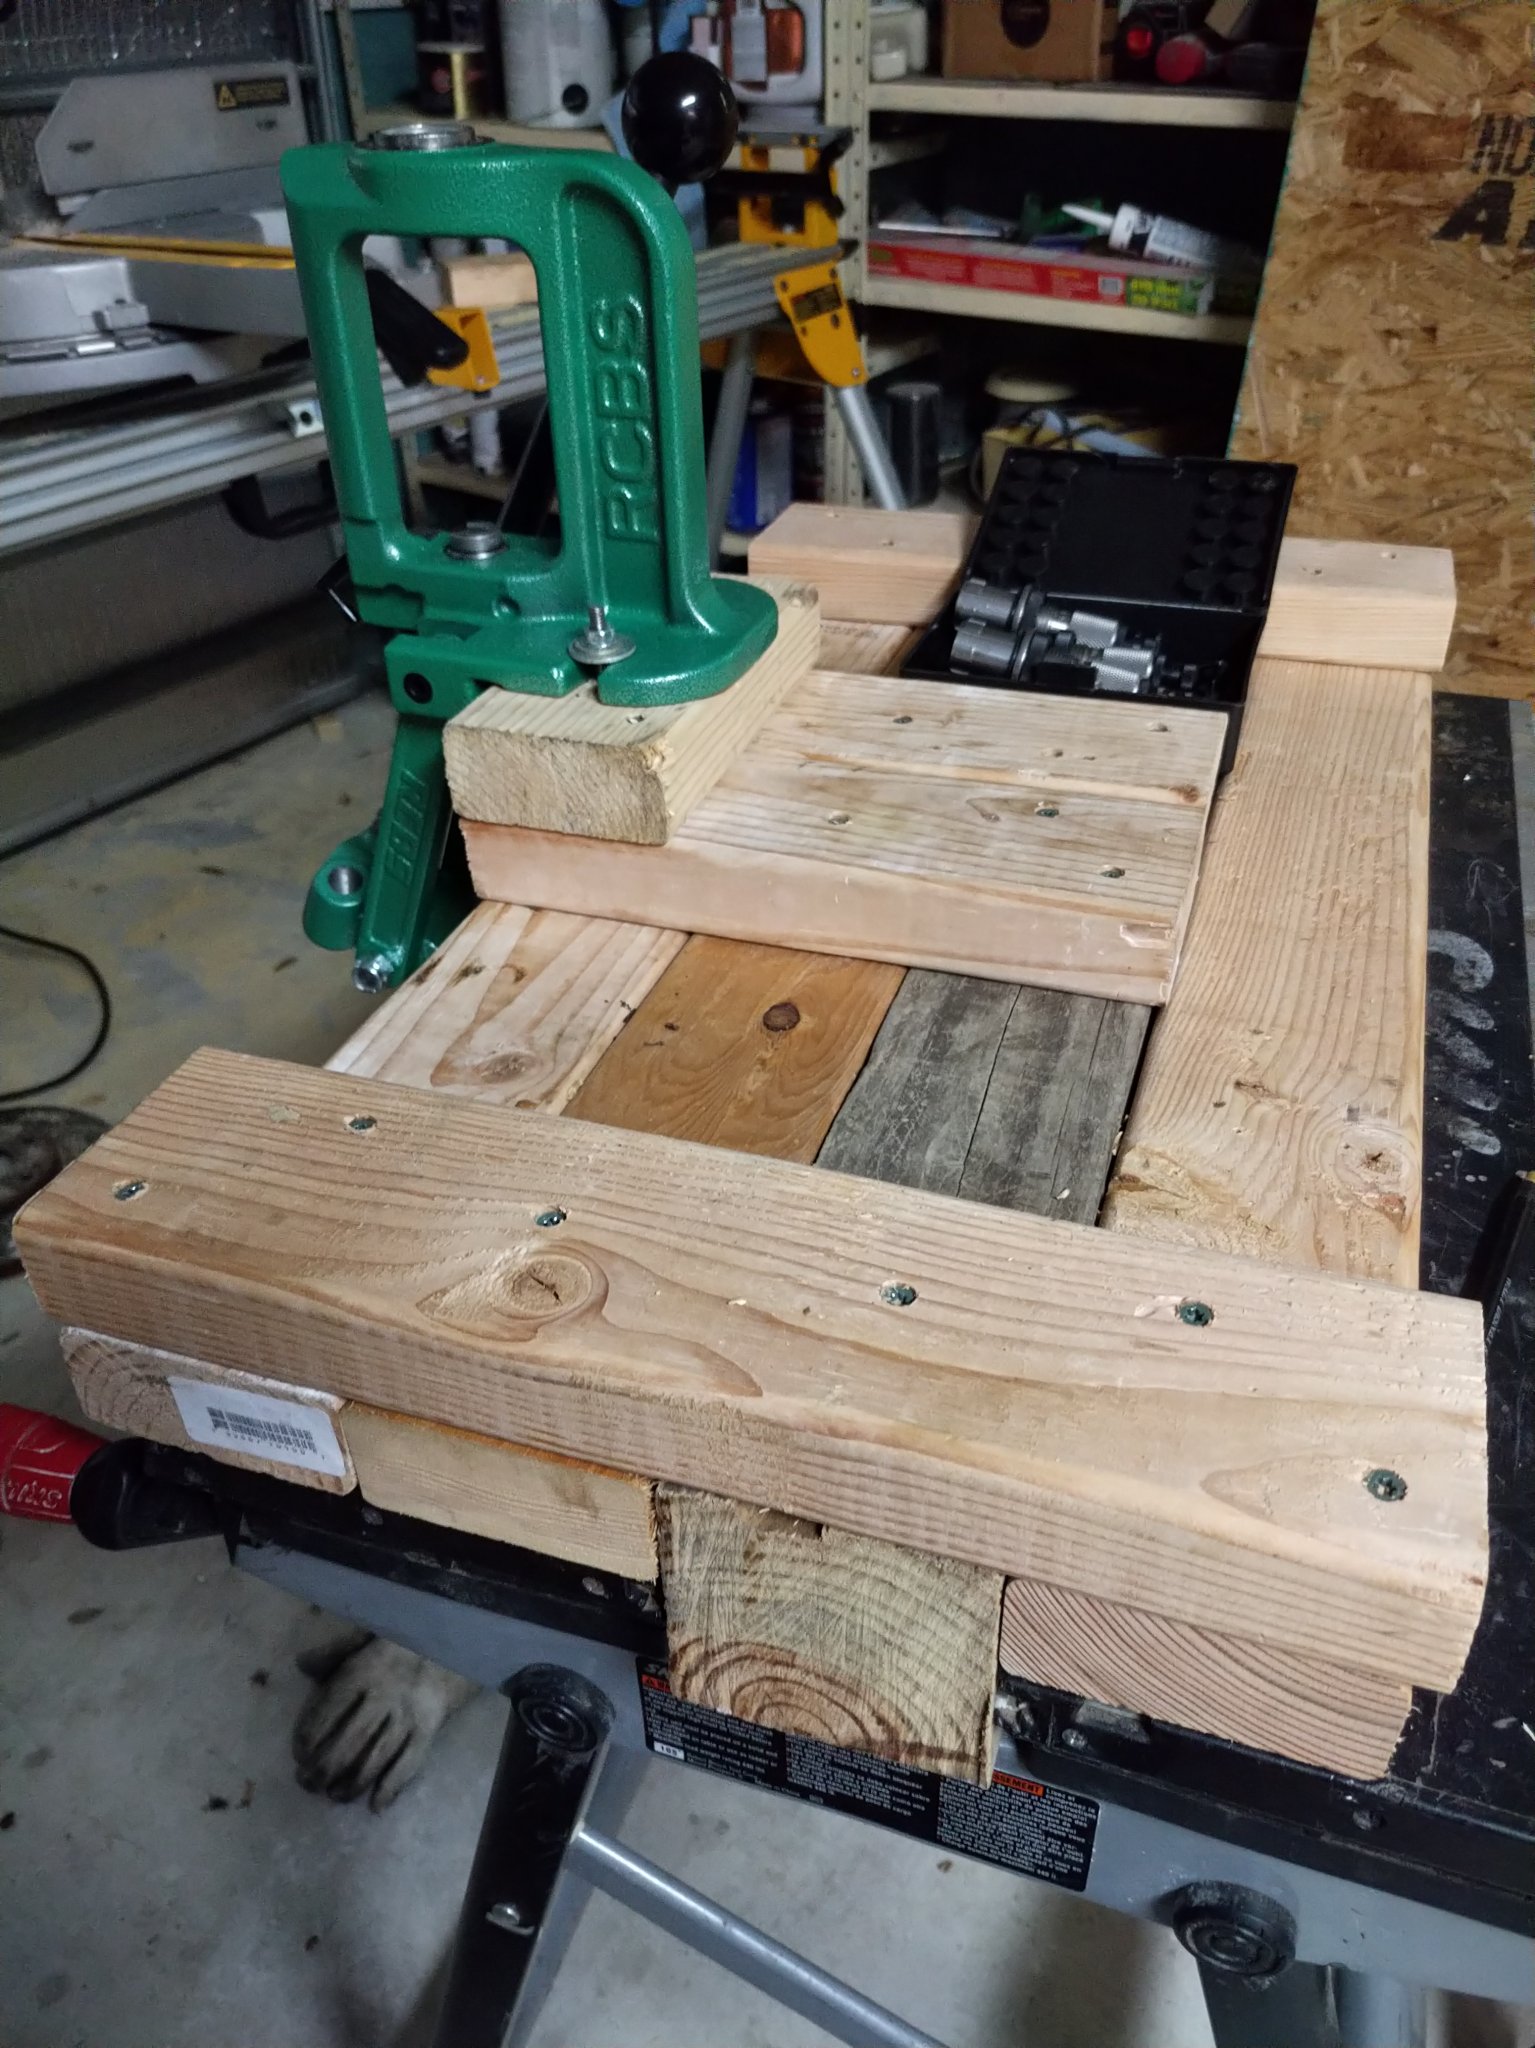 Build a Portable Reloading Bench Using a Black & Decker Workmate